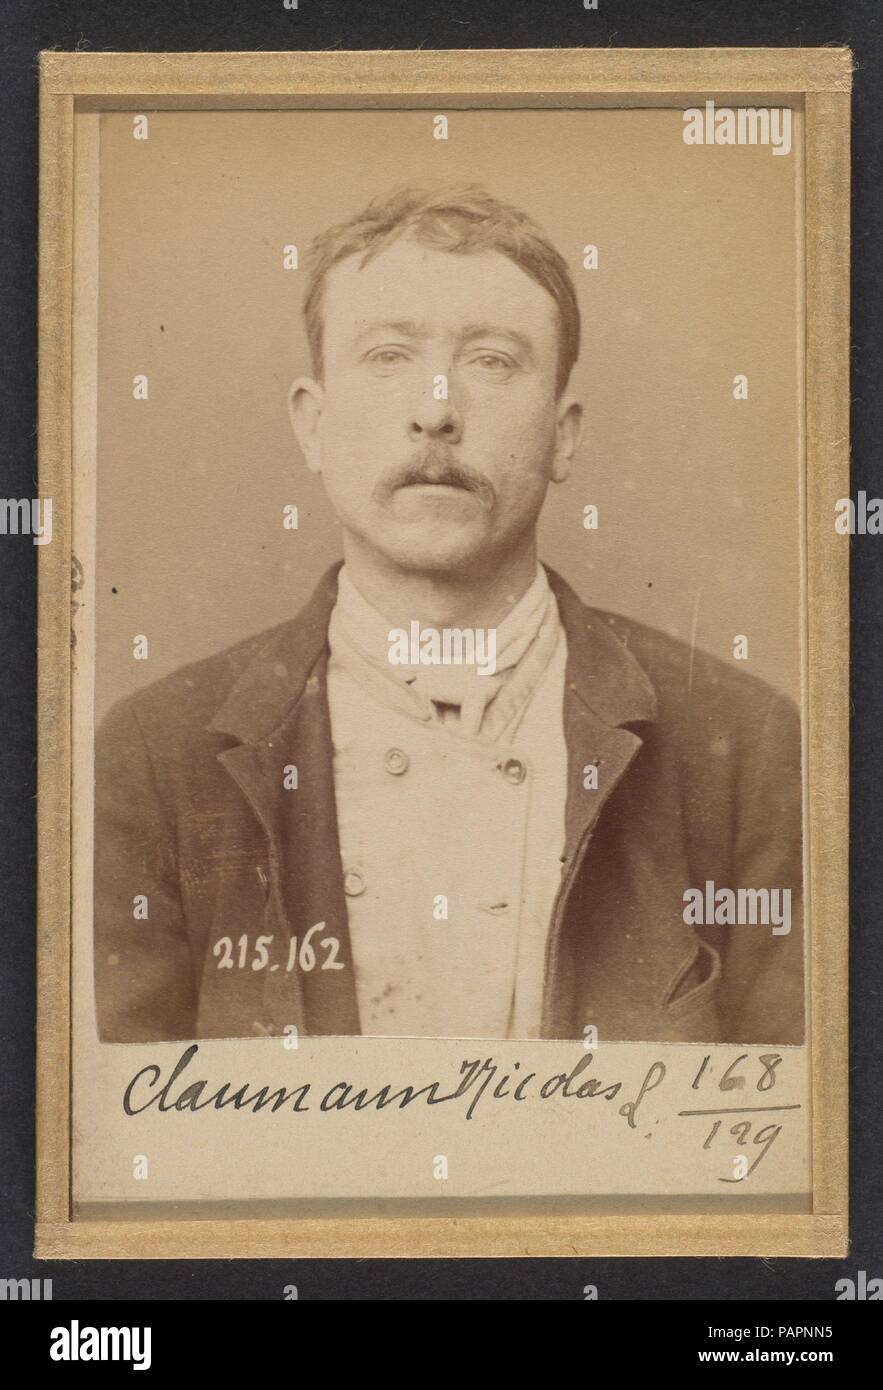 Chauman. Nicolas. 38 ans, né à Paris XVe. Puisatier. Anarchiste. 6/3/94. Artist: Alphonse Bertillon (French, 1853-1914). Dimensions: 10.5 x 7 x 0.5 cm (4 1/8 x 2 3/4 x 3/16 in.) each. Date: 1894.  Born into a distinguished family of scientists and statisticians, Bertillon began his career as a clerk in the Identification Bureau of the Paris Prefecture of Police in 1879. Tasked with maintaining reliable police records of offenders, he developed the first modern system of criminal identification. The system, which became known as Bertillonage, had three components: anthropometric measurement, pr Stock Photo